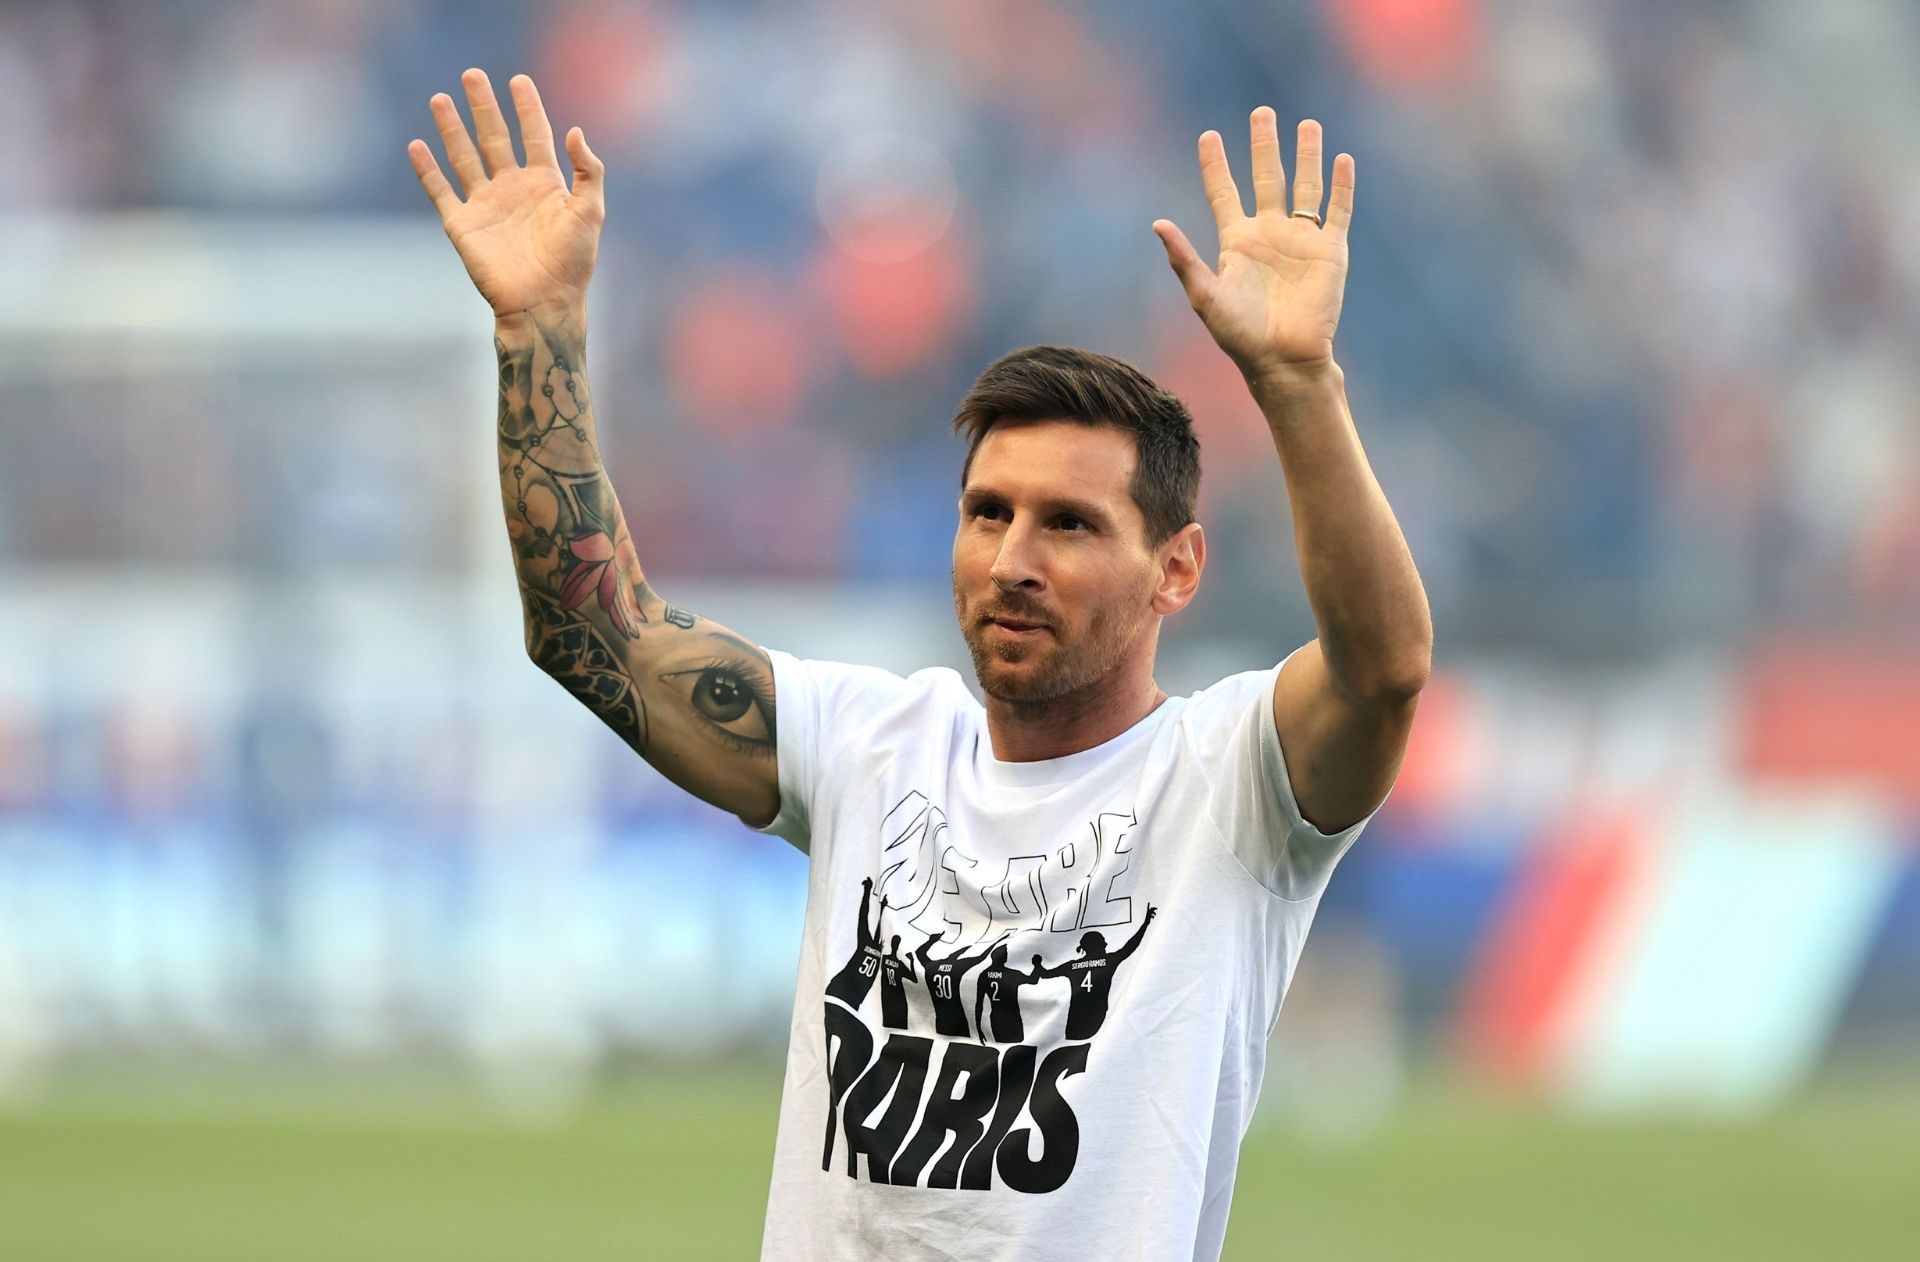 Messi hails 'incredible' reception as PSG unveil all 5 summer signings